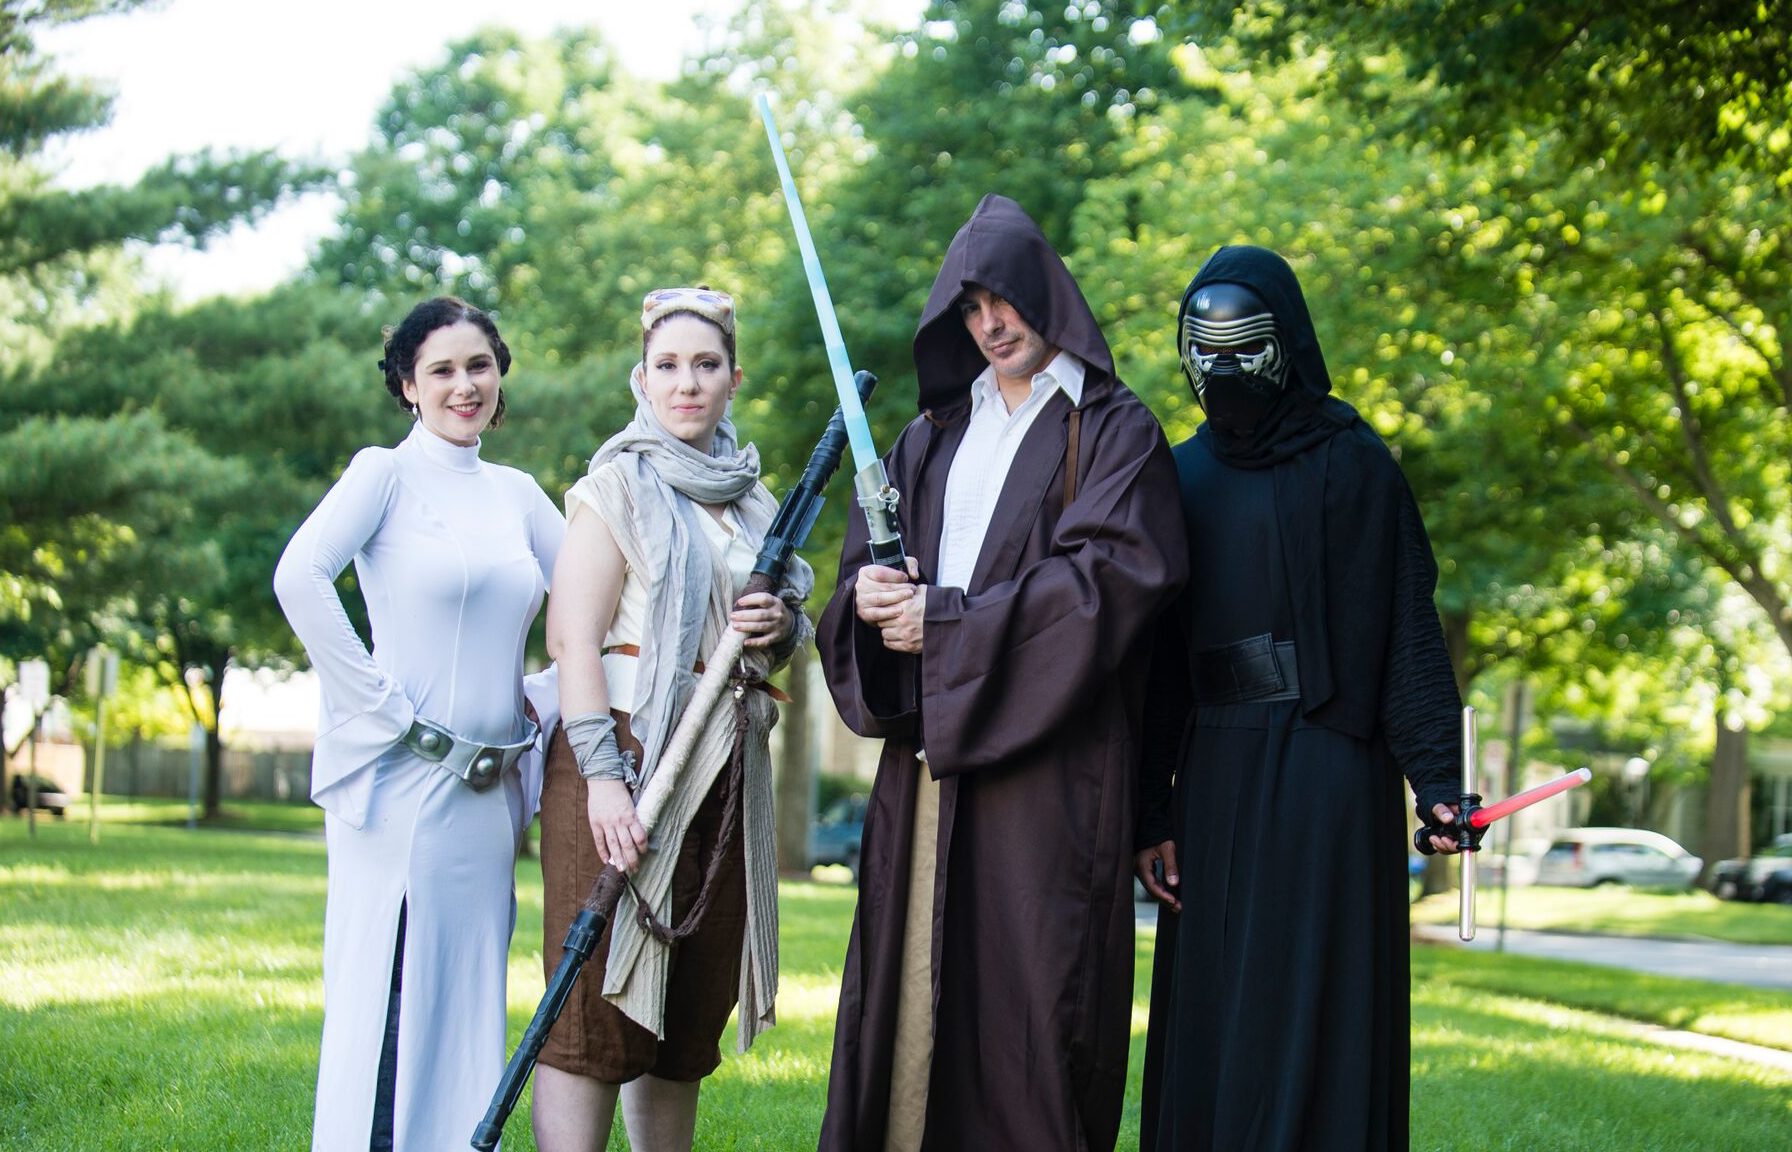 star wars Silver spring md fairytale princess events